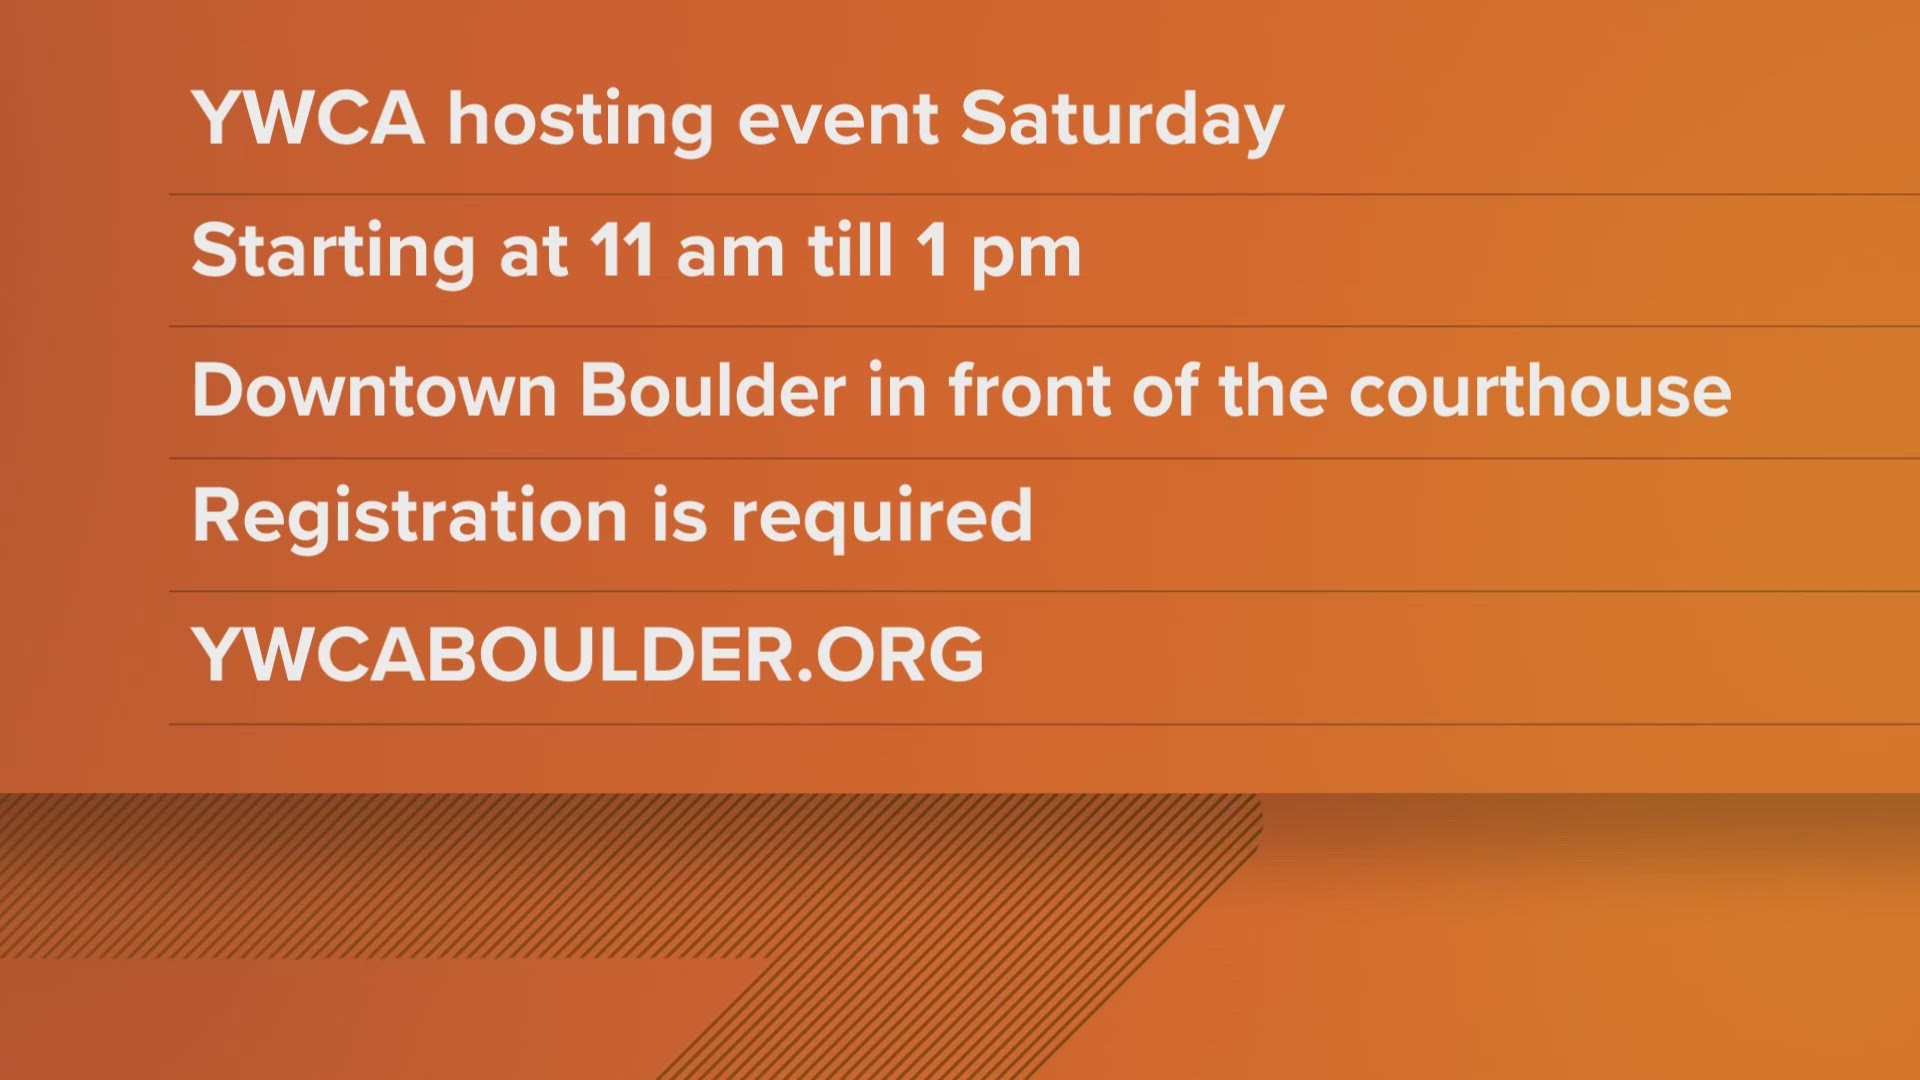 The rally and signature-gathering event Saturday in Boulder focuses on an effort to protect abortion access in Colorado.